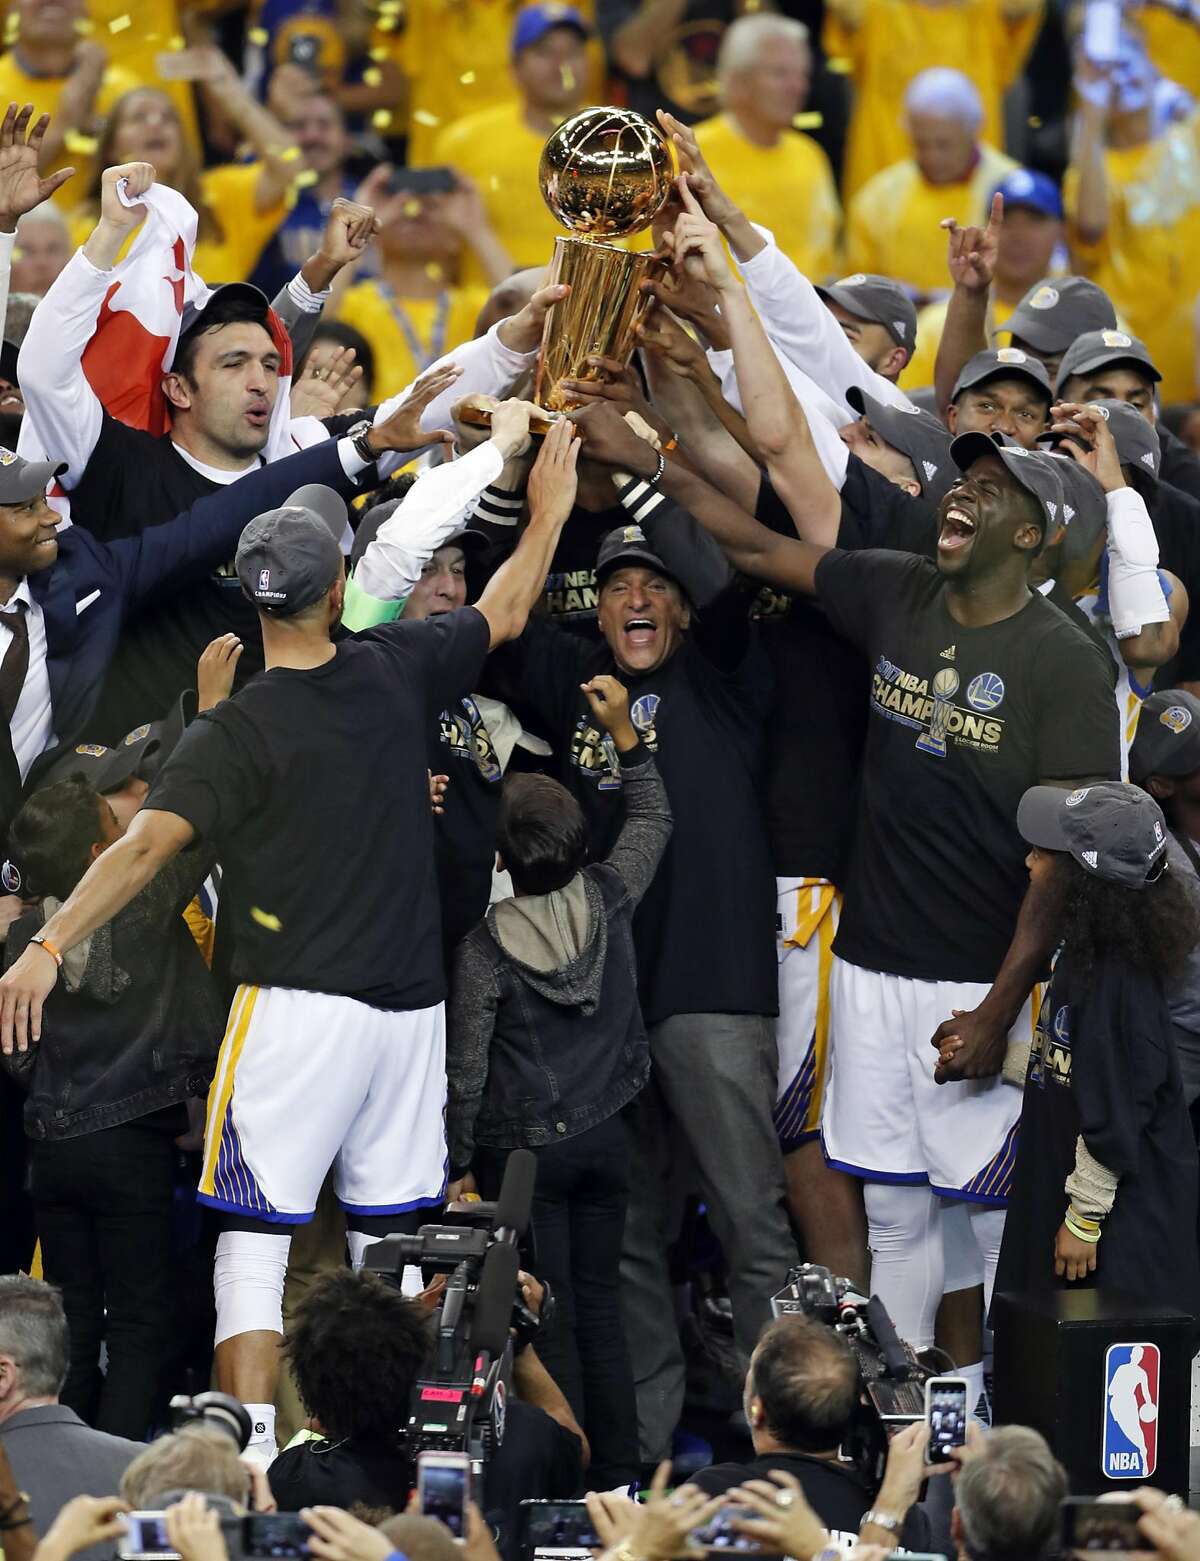 Cleveland turns out to celebrate NBA champions